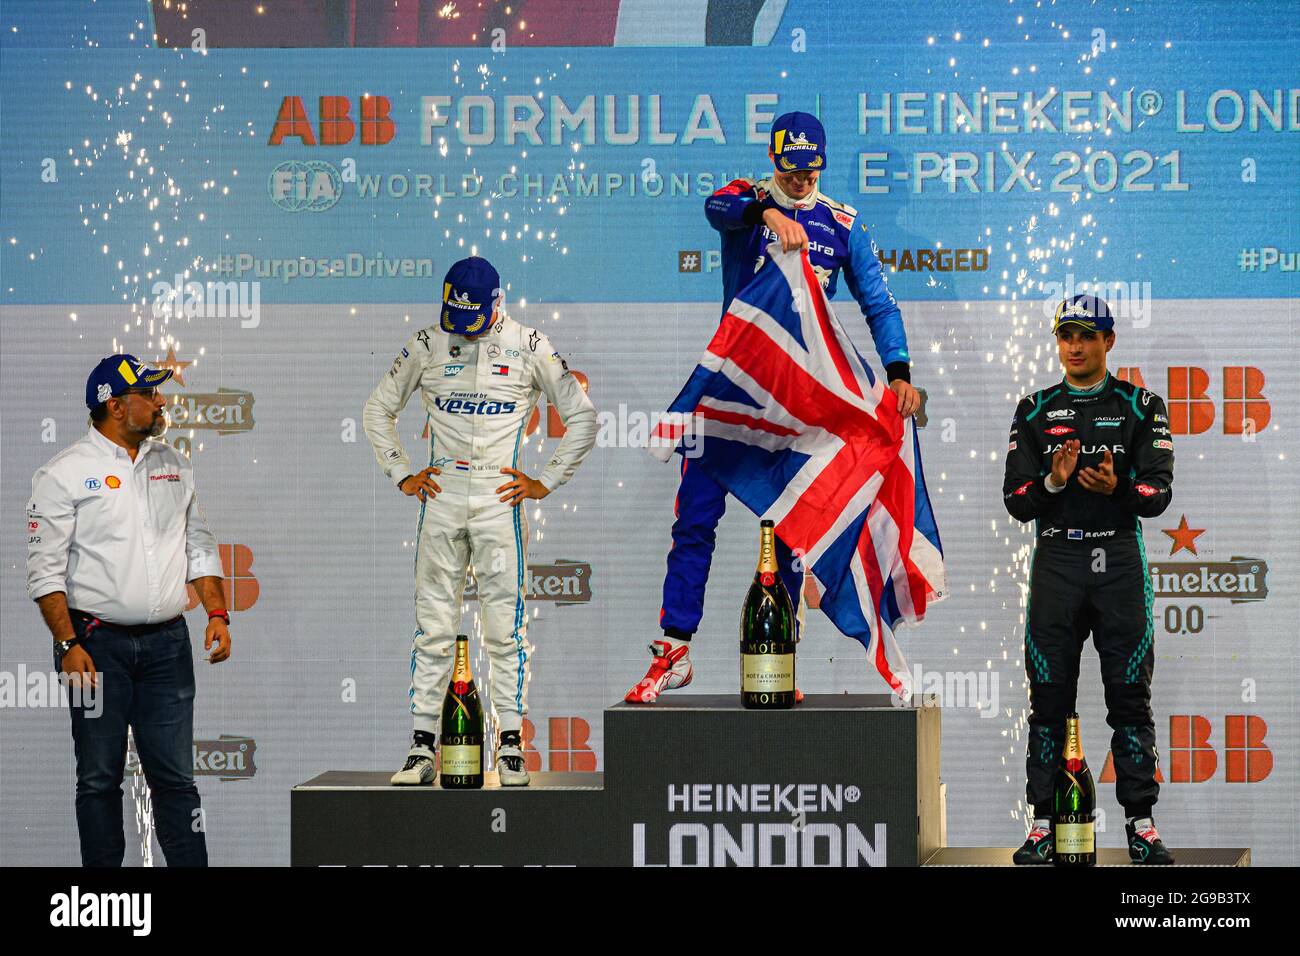 LONDON, United Kingdom. 25th July, 2021. Alex Lynn of Mahindra Racing celebrates after winning the Round 13: 2021 Heineken London E-Prix at The Excel Circuit on Sunday, July 25, 2021 in LONDON, ENGLAND. Credit: Taka G Wu/Alamy Live News Stock Photo